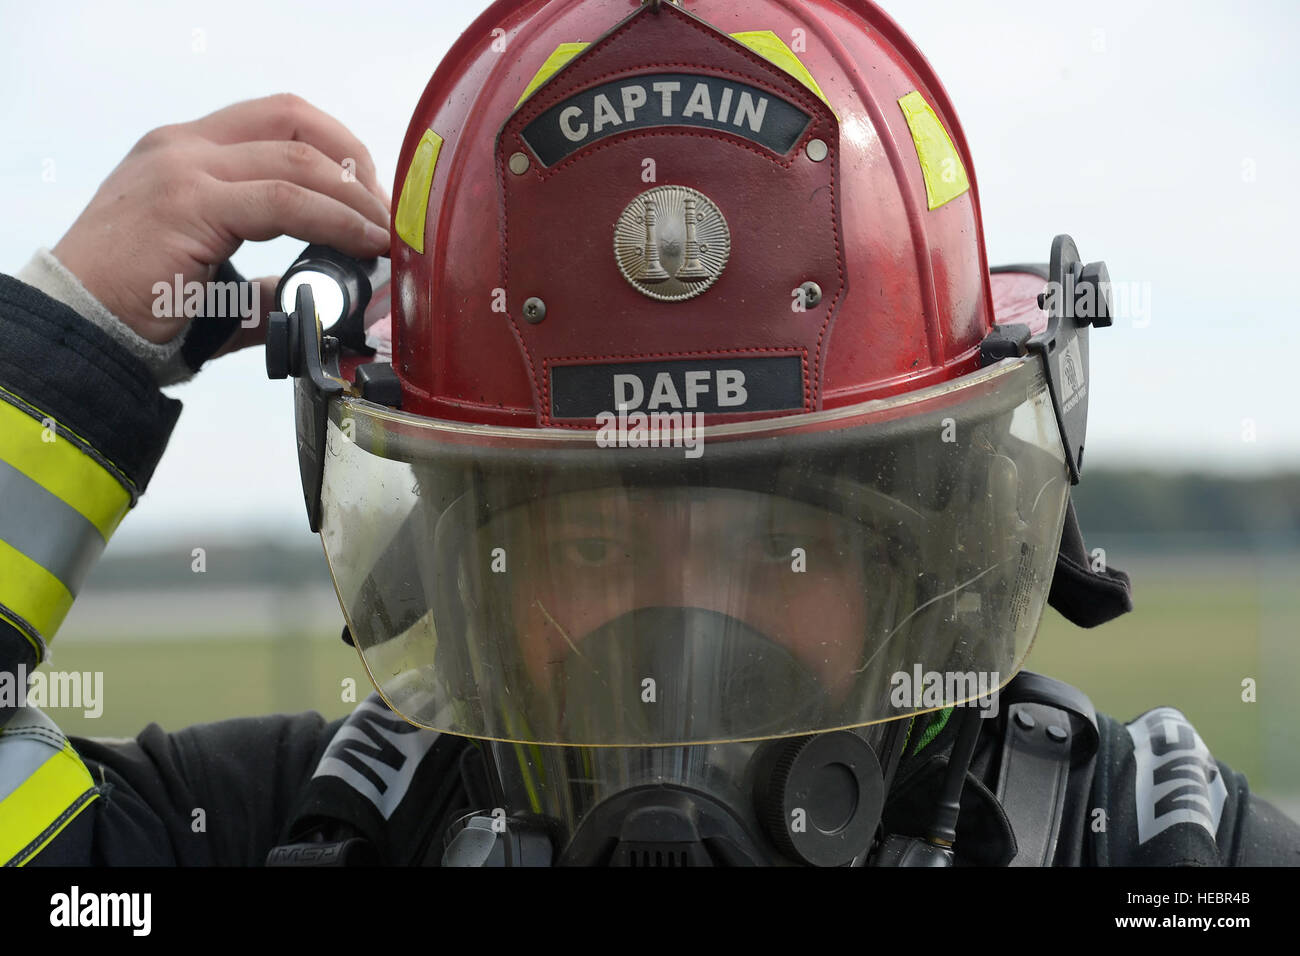 Tech. Sgt. Ryan Atoigue adjusts a light attached to his helmet while participating in structural fire training Oct. 20, 2014, at Dover Air Force Base, Del. Atoigue's helmet indicates that he is a firecrew captain with the 436th Civil Engineer Squadron. (U.S. Air Force photo/Greg L. Davis) Stock Photo